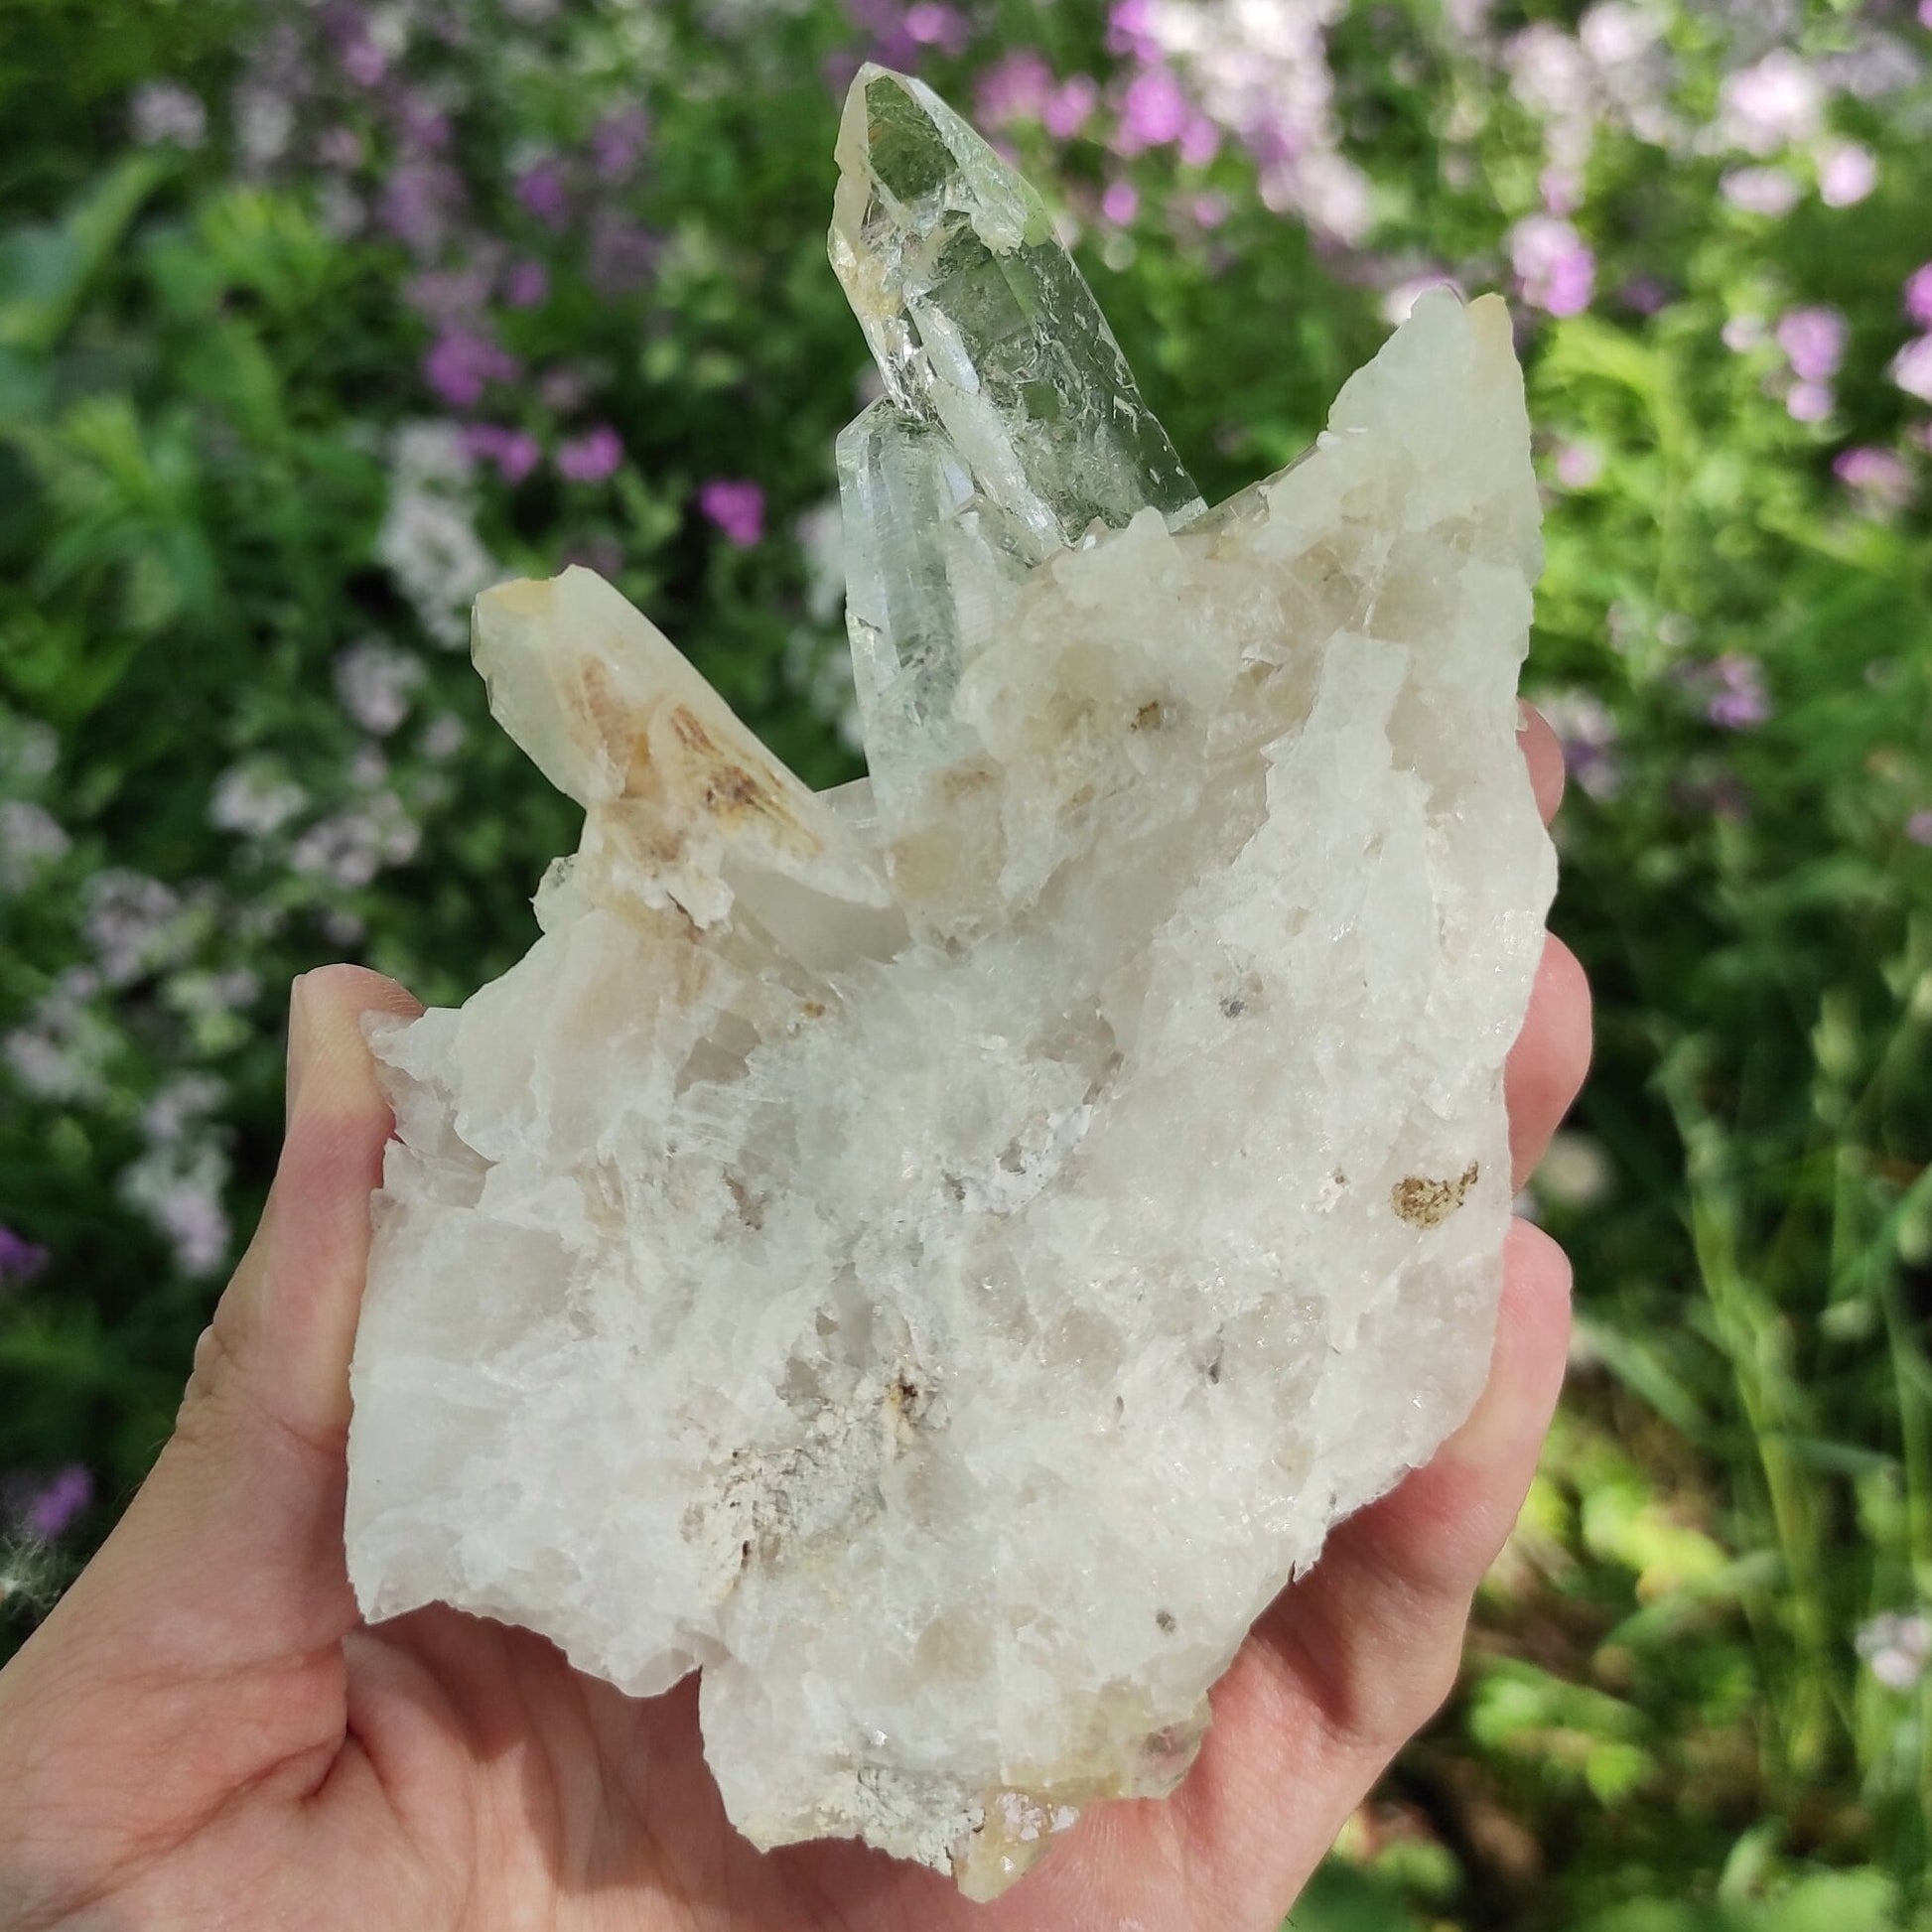 295g Clear Quartz Crystal Cluster from Colombia - Untreated Quartz Point Cluster -  Mineral Specimen - White Quartz Crystal - Clear Quartz